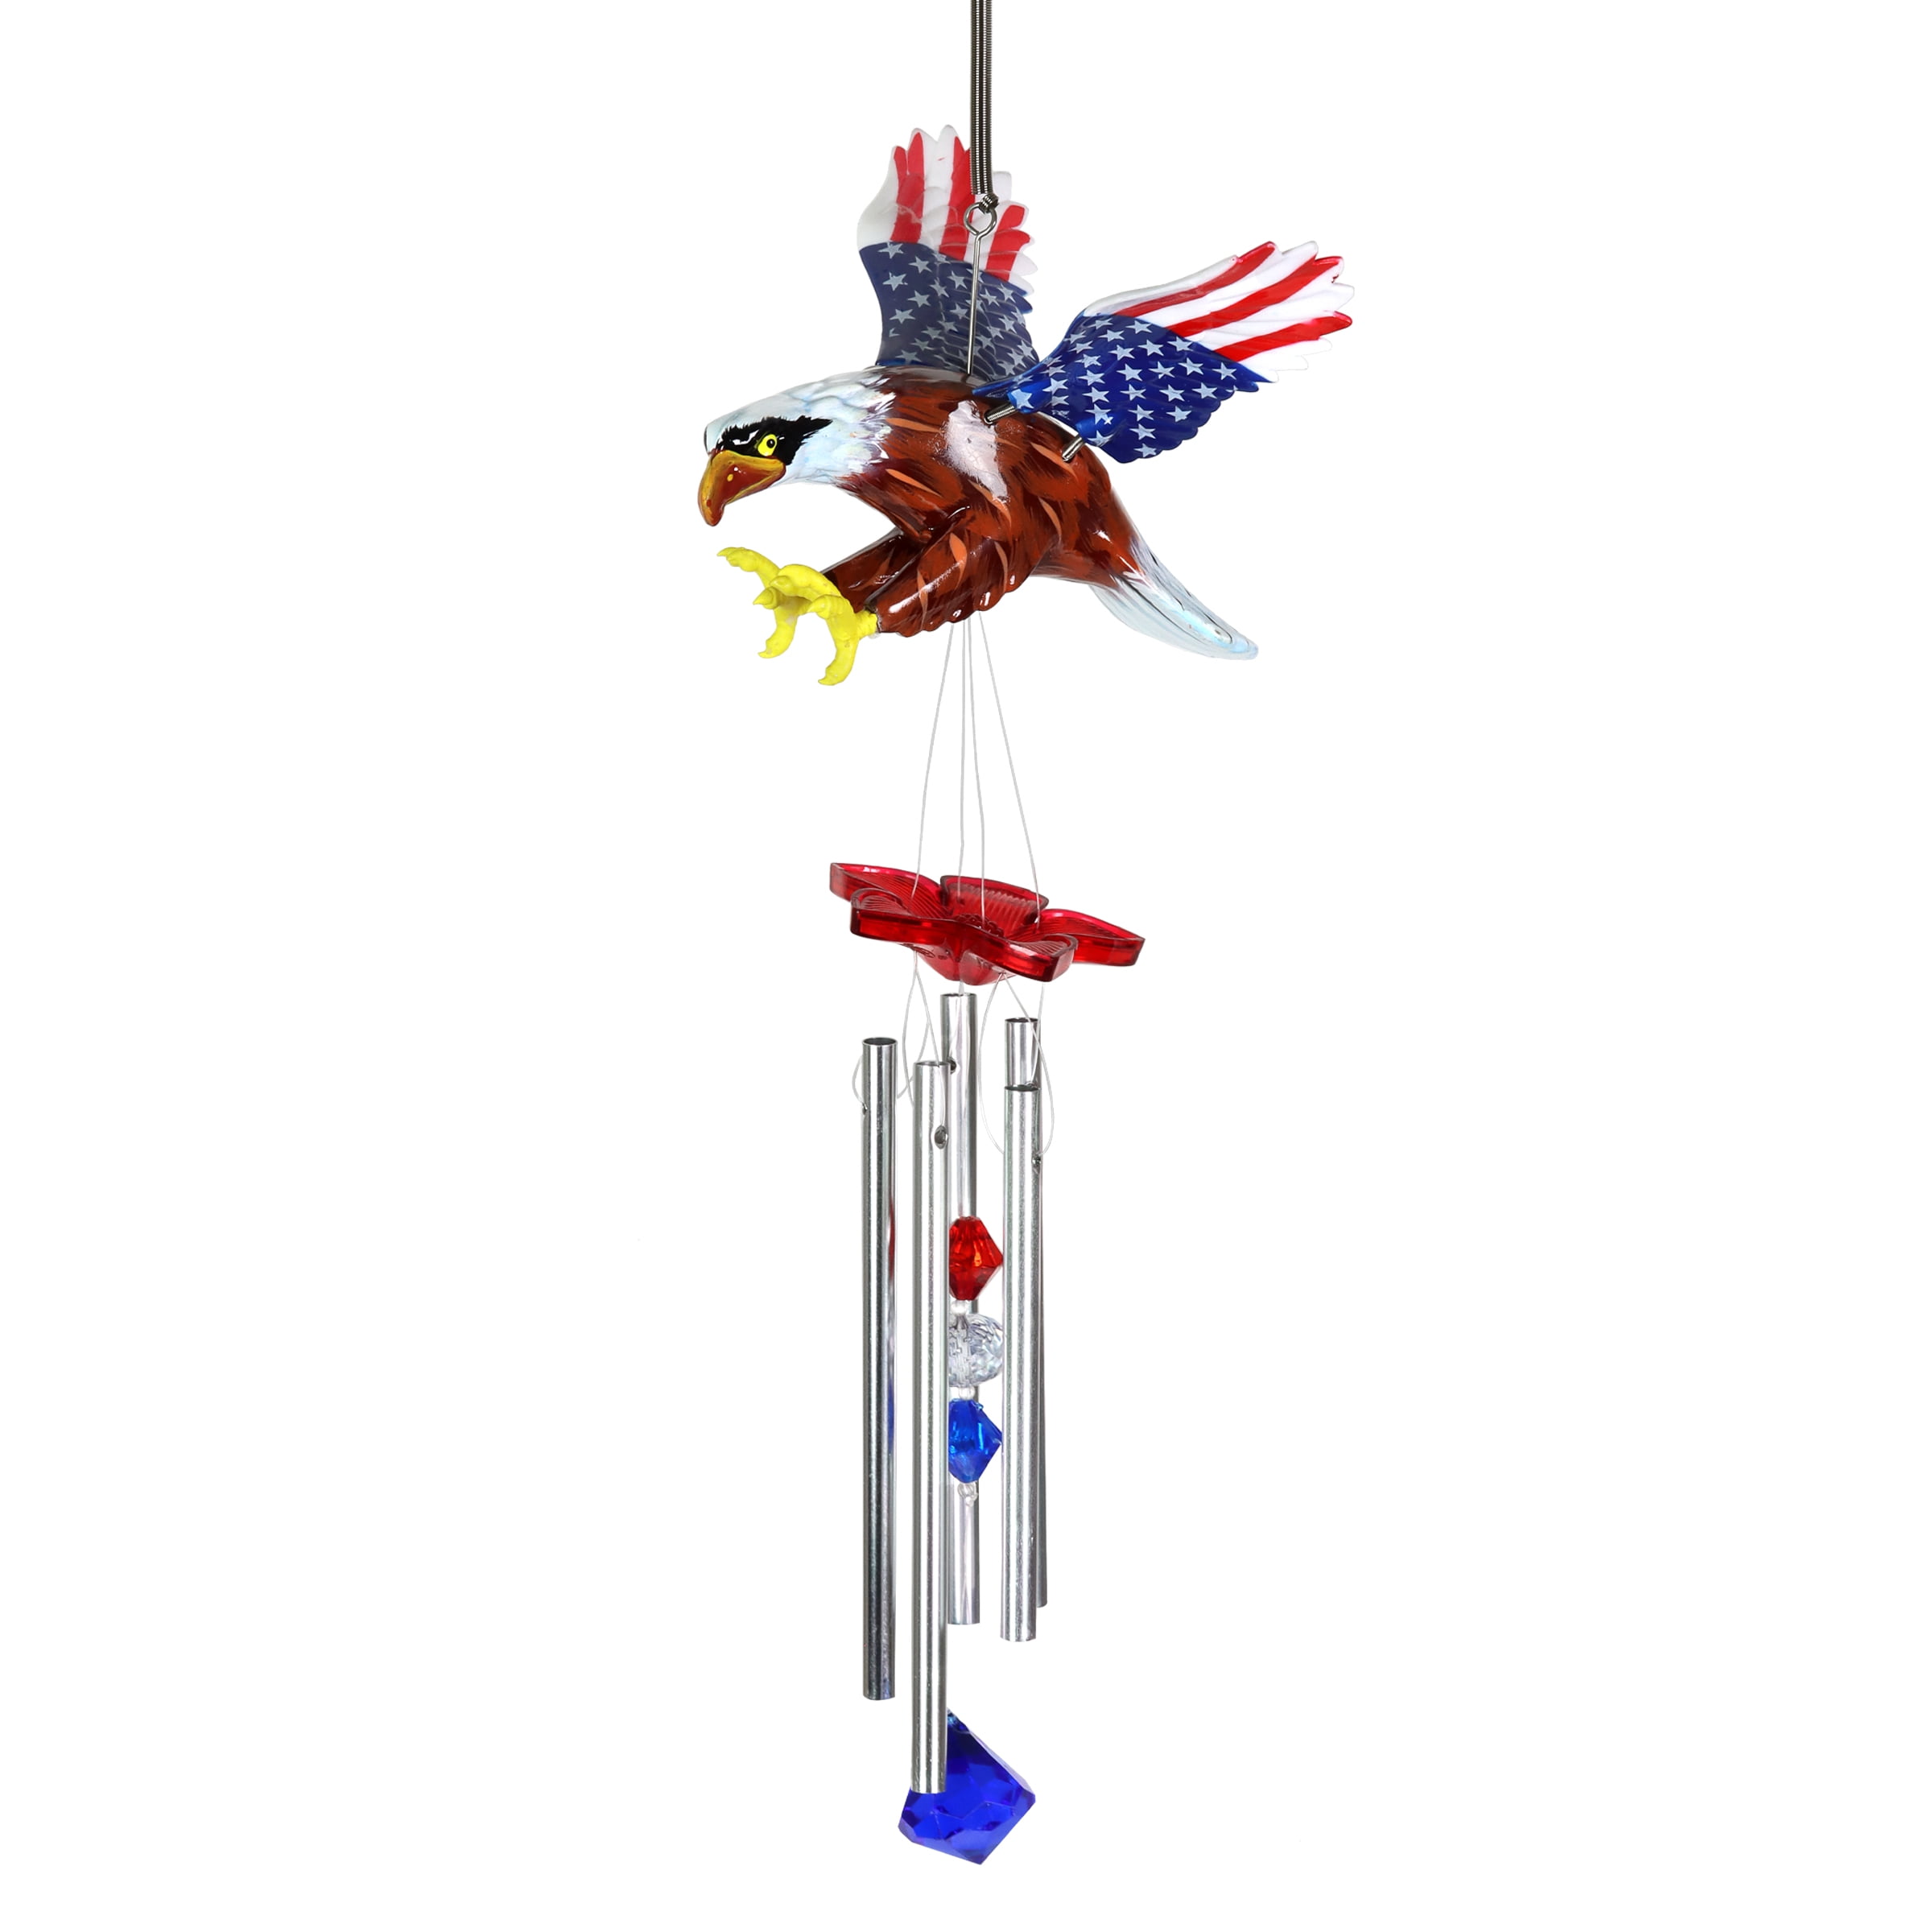 Party Cup Large WhirliGig Wind Spinner - I AmEricas Flags